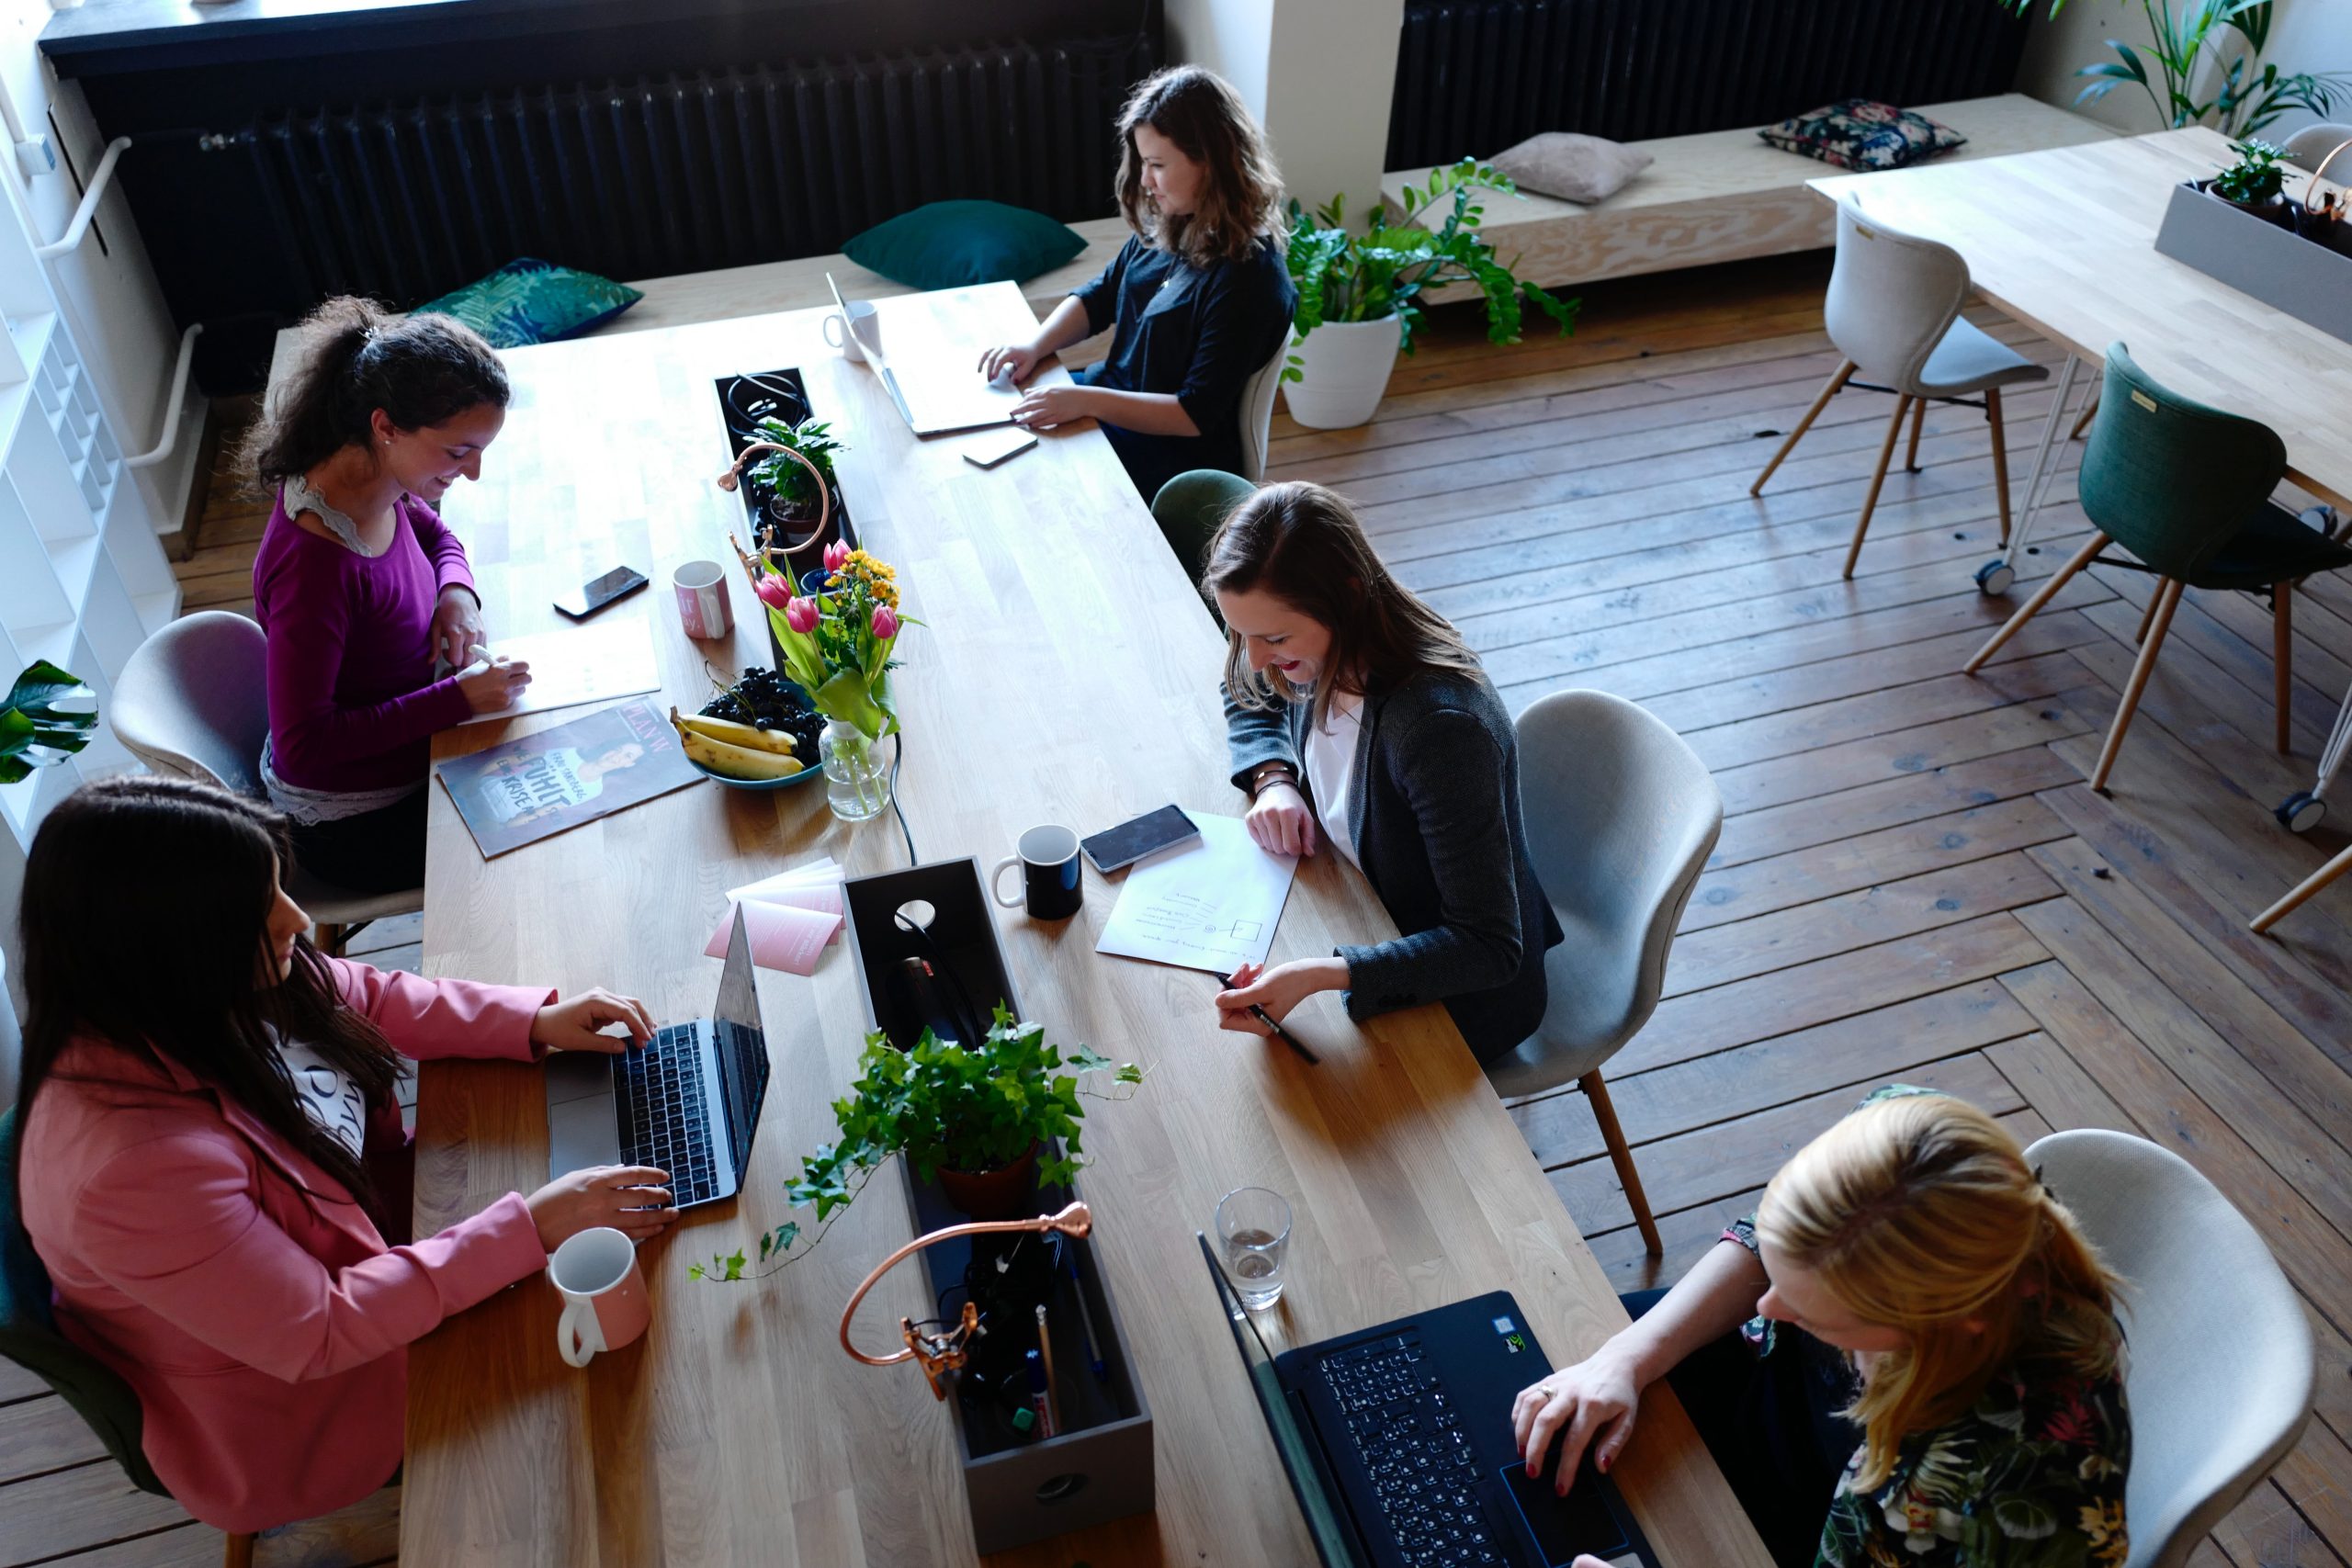 5 women are networking in an open space office